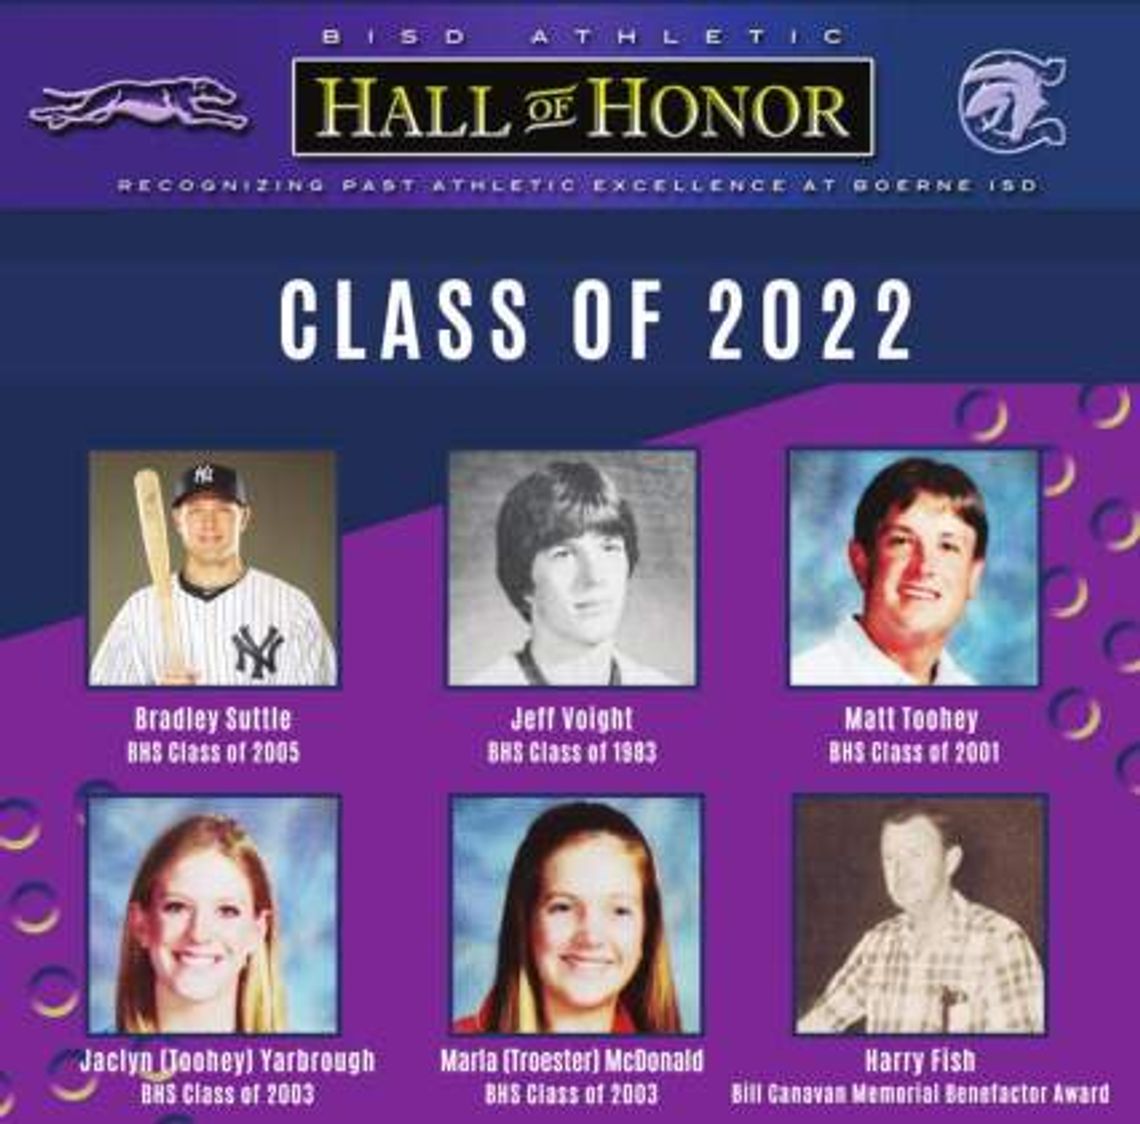 Boerne ISD announces 2022 Athletic Hall of Honor class